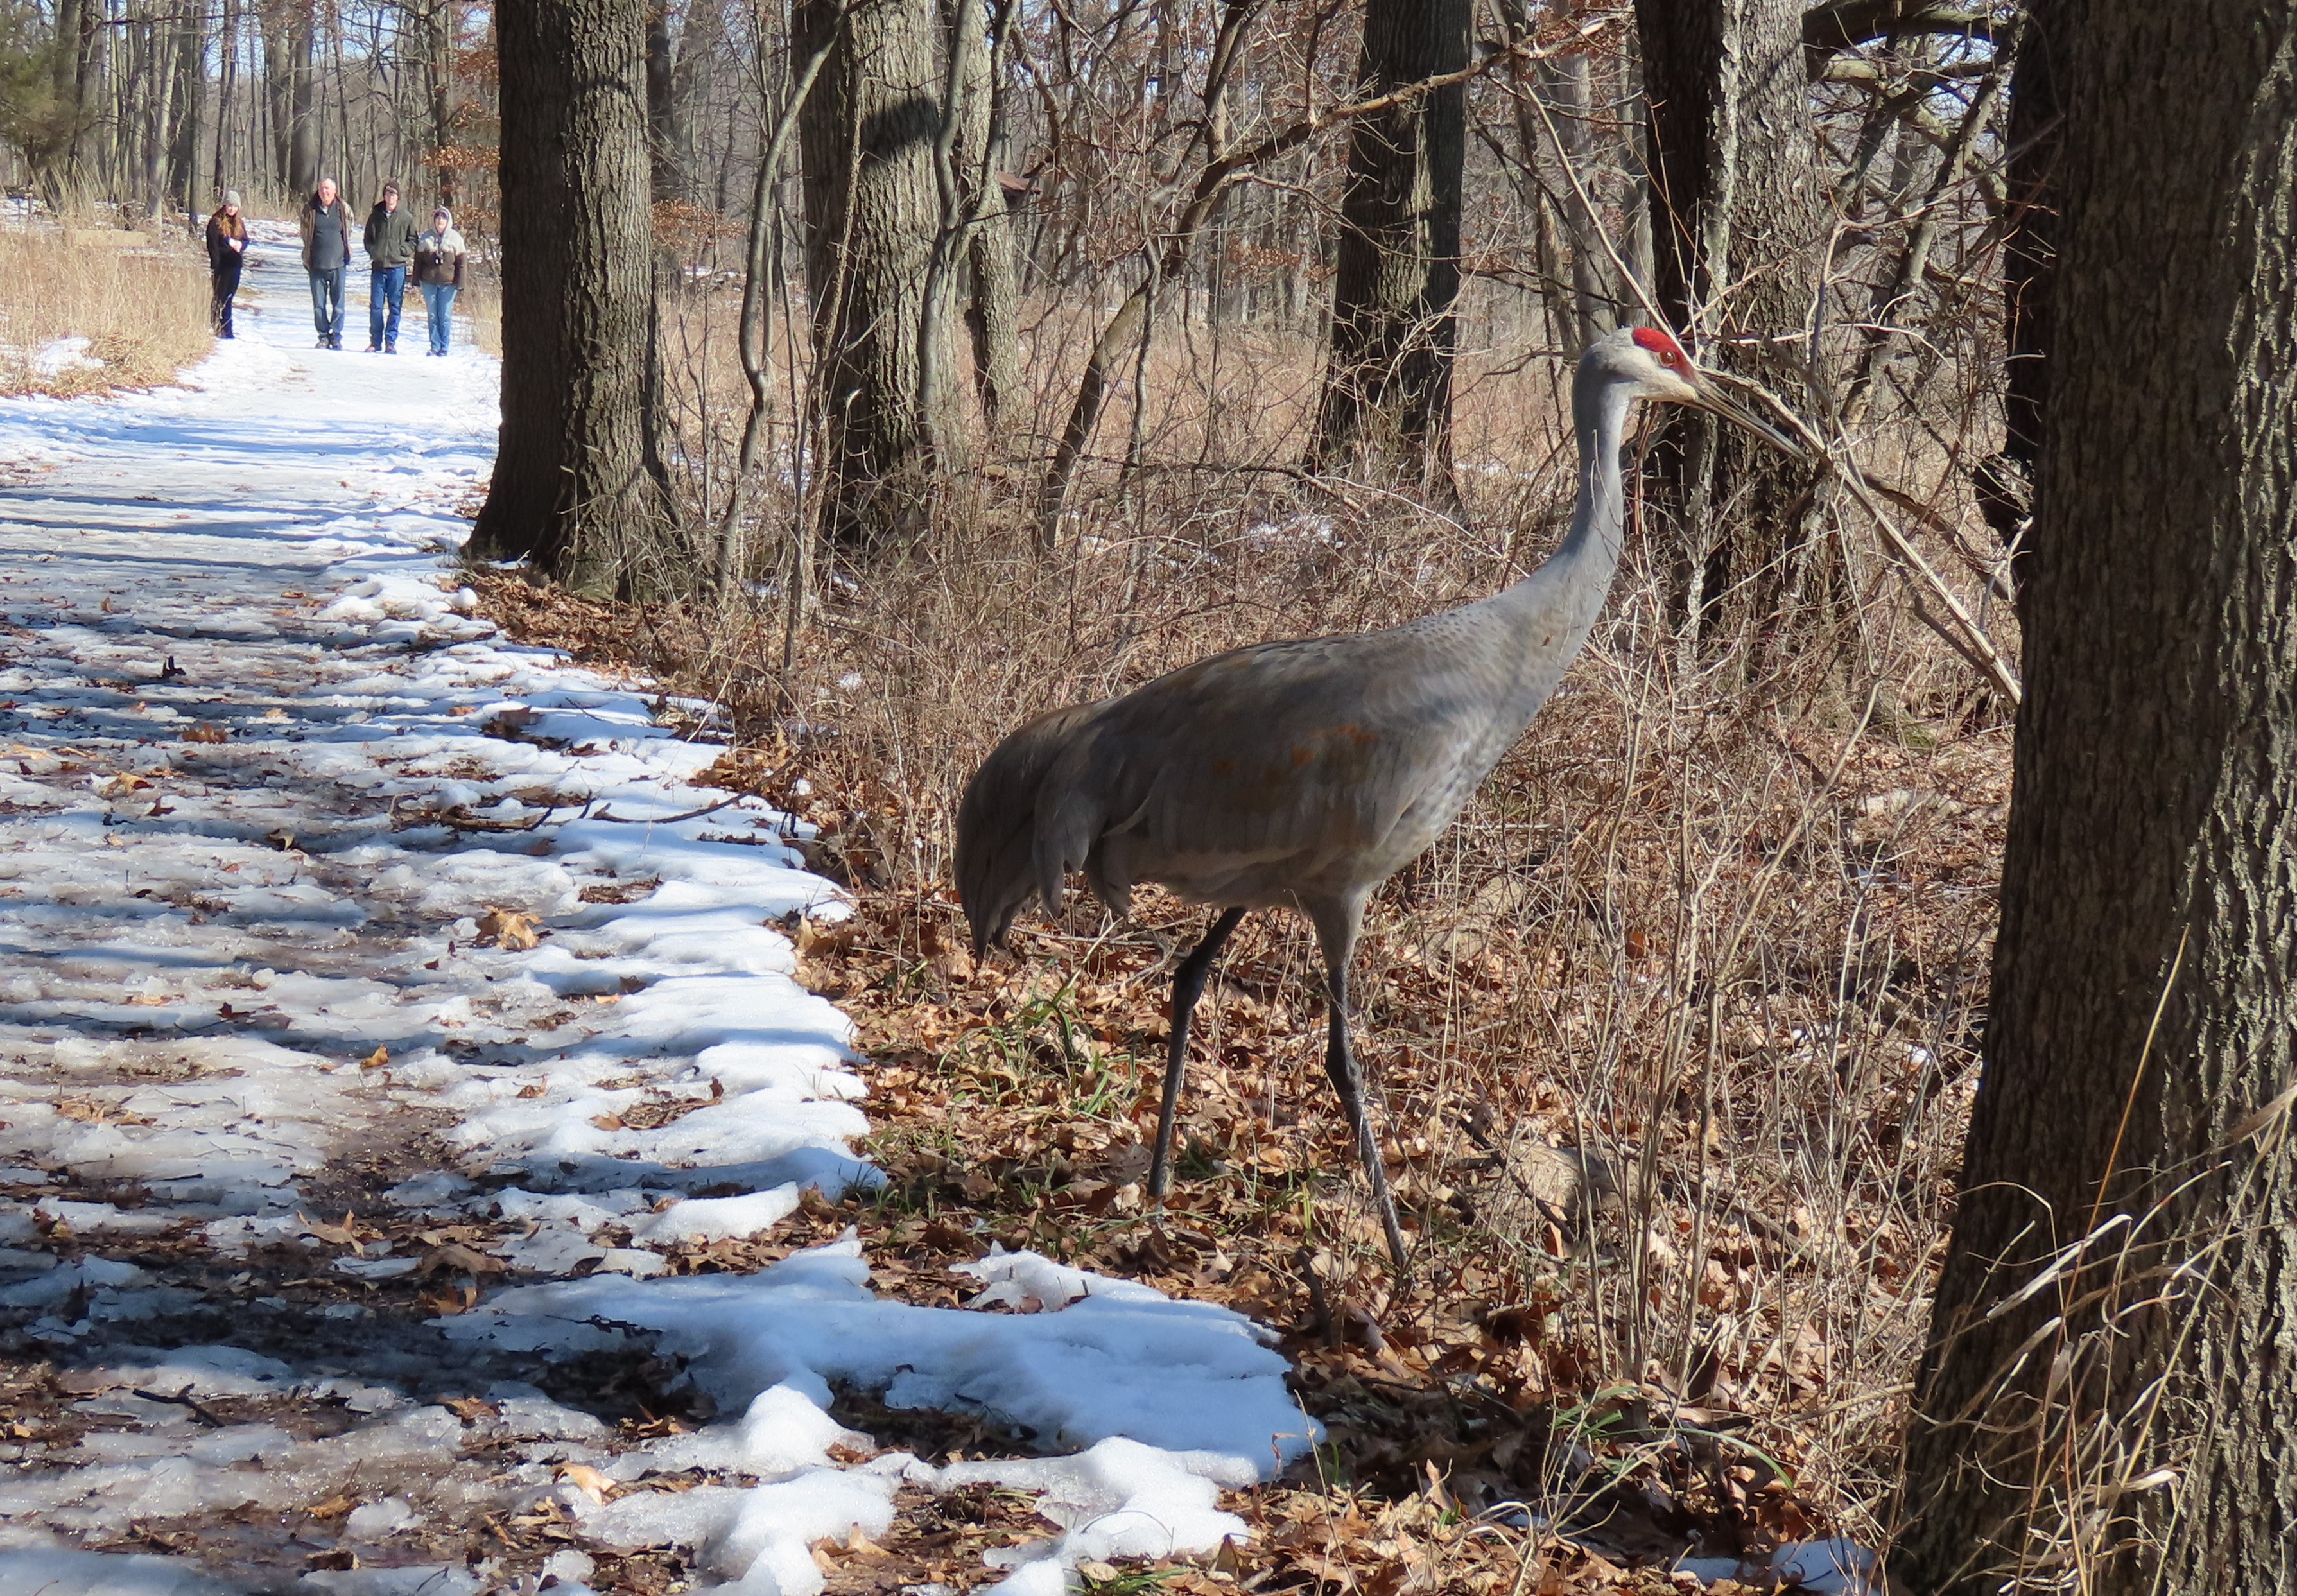 A Sandhill Crane walks across a snowy trail while four people watch from a distance